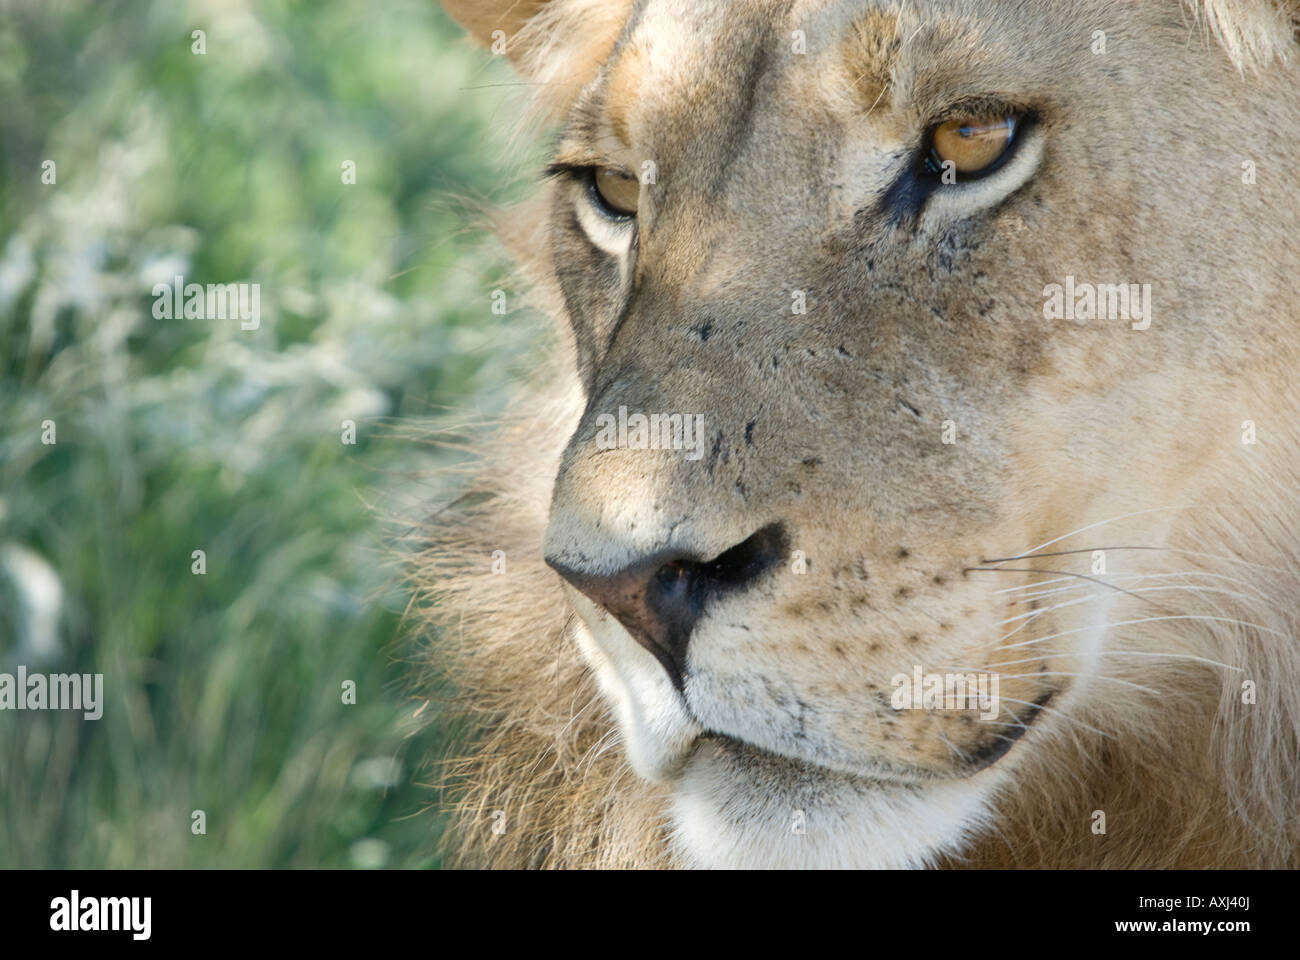 A profile portrait of a young male lion in the Kalahari with a green background of vegetation Stock Photo